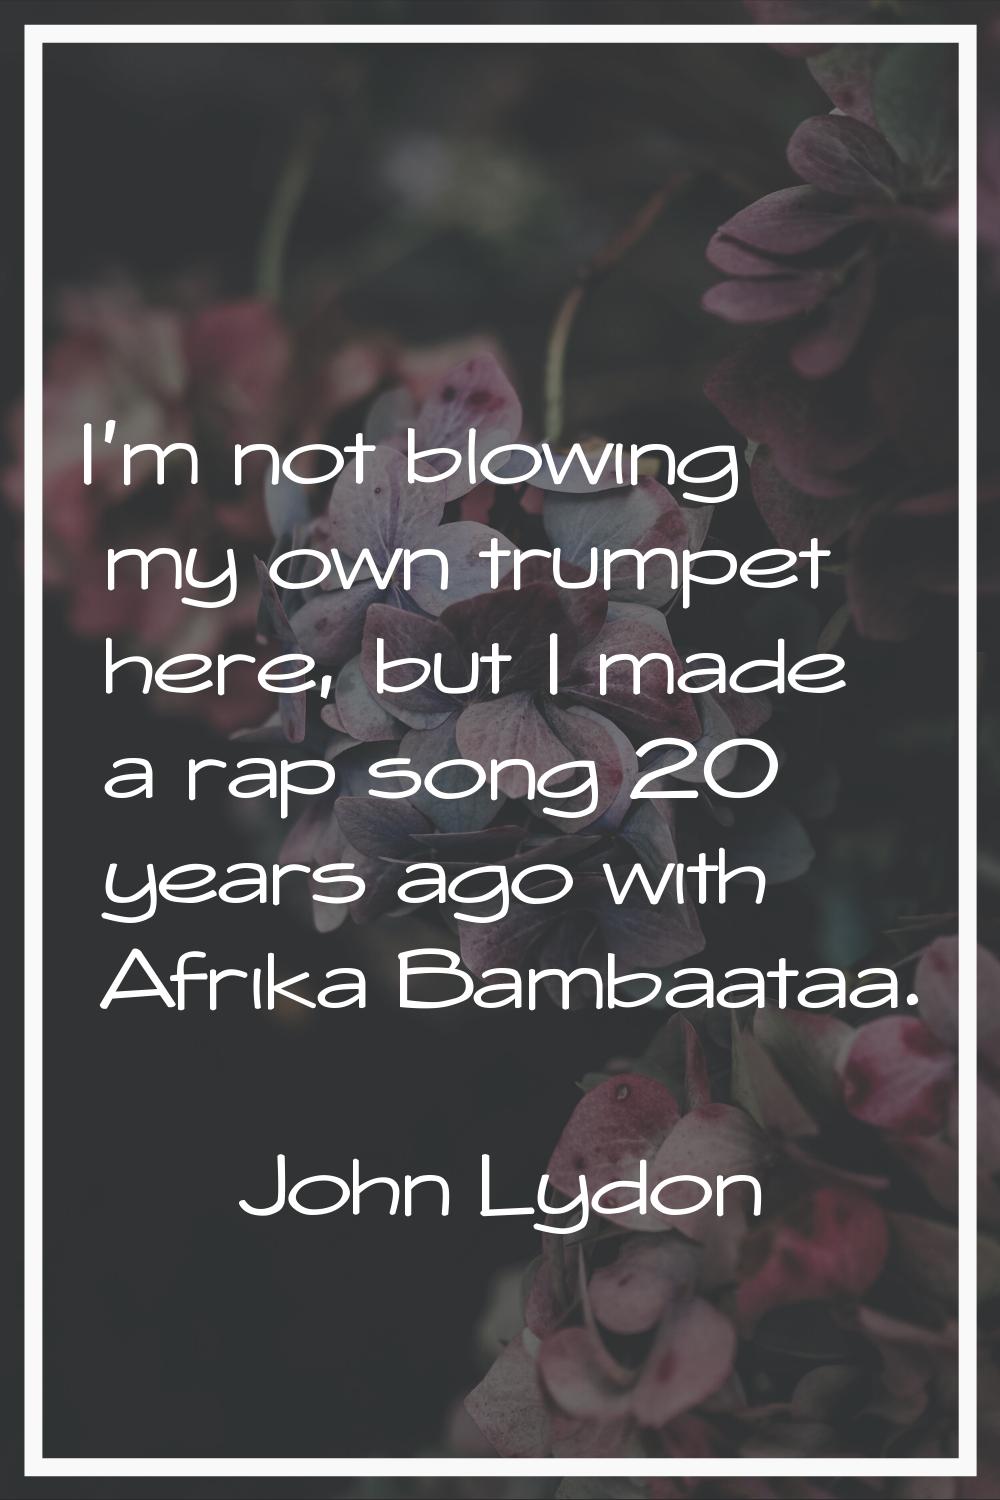 I'm not blowing my own trumpet here, but I made a rap song 20 years ago with Afrika Bambaataa.